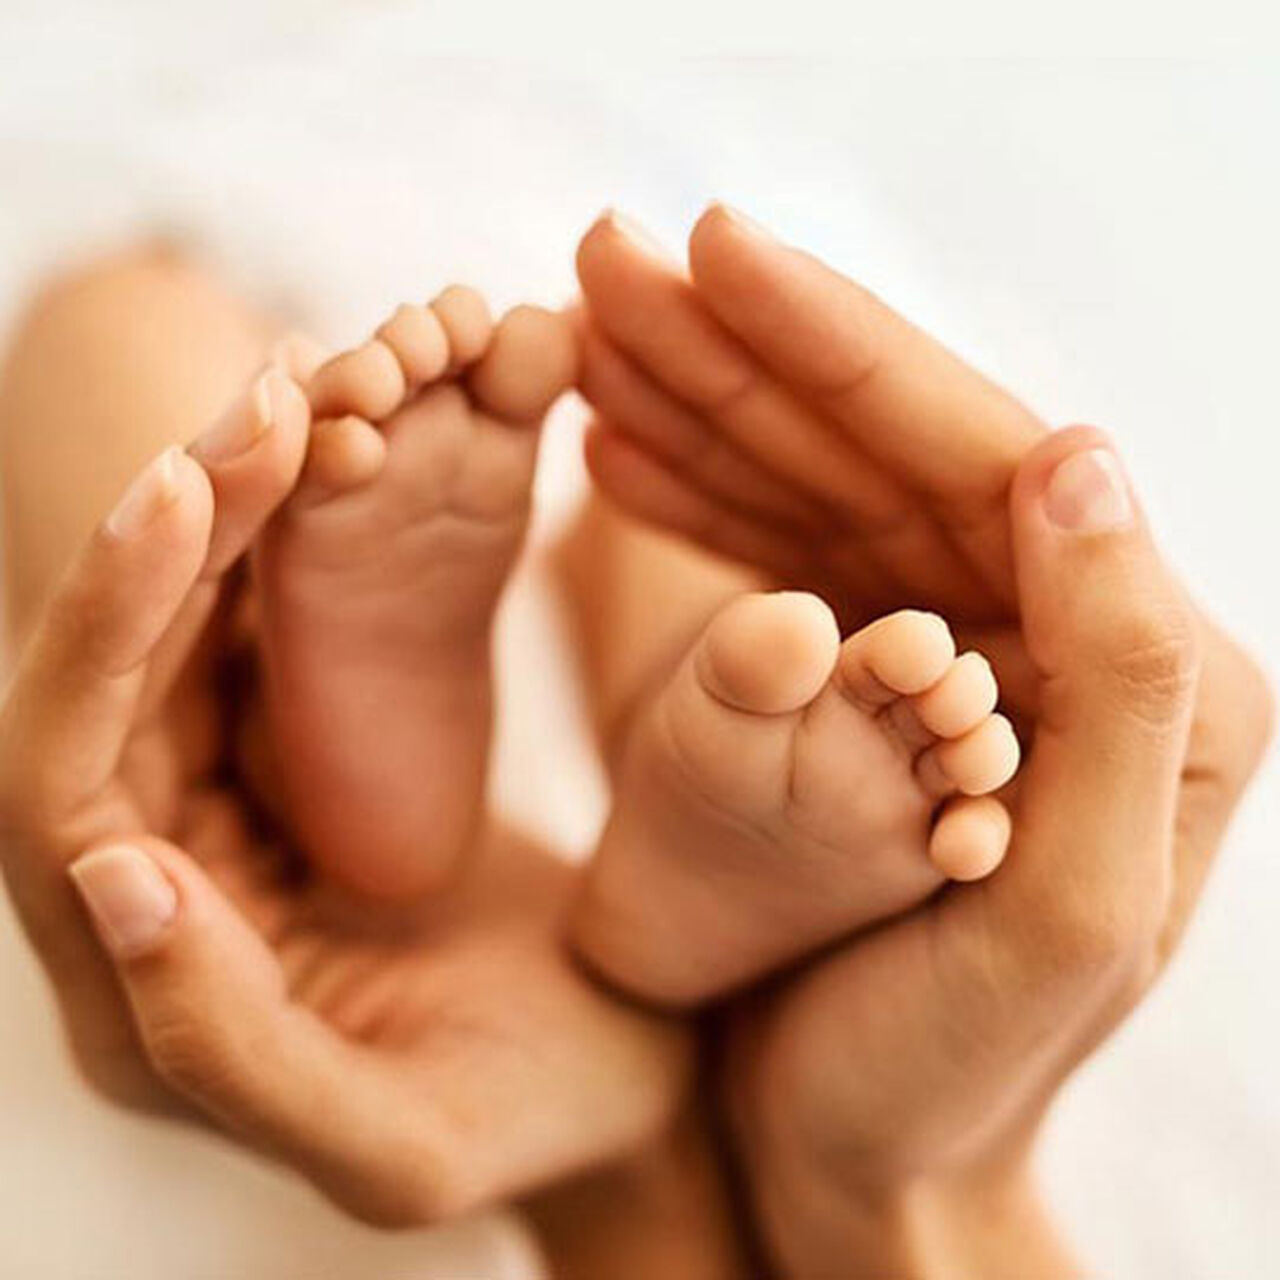 Hands cupping babies feet image number 0